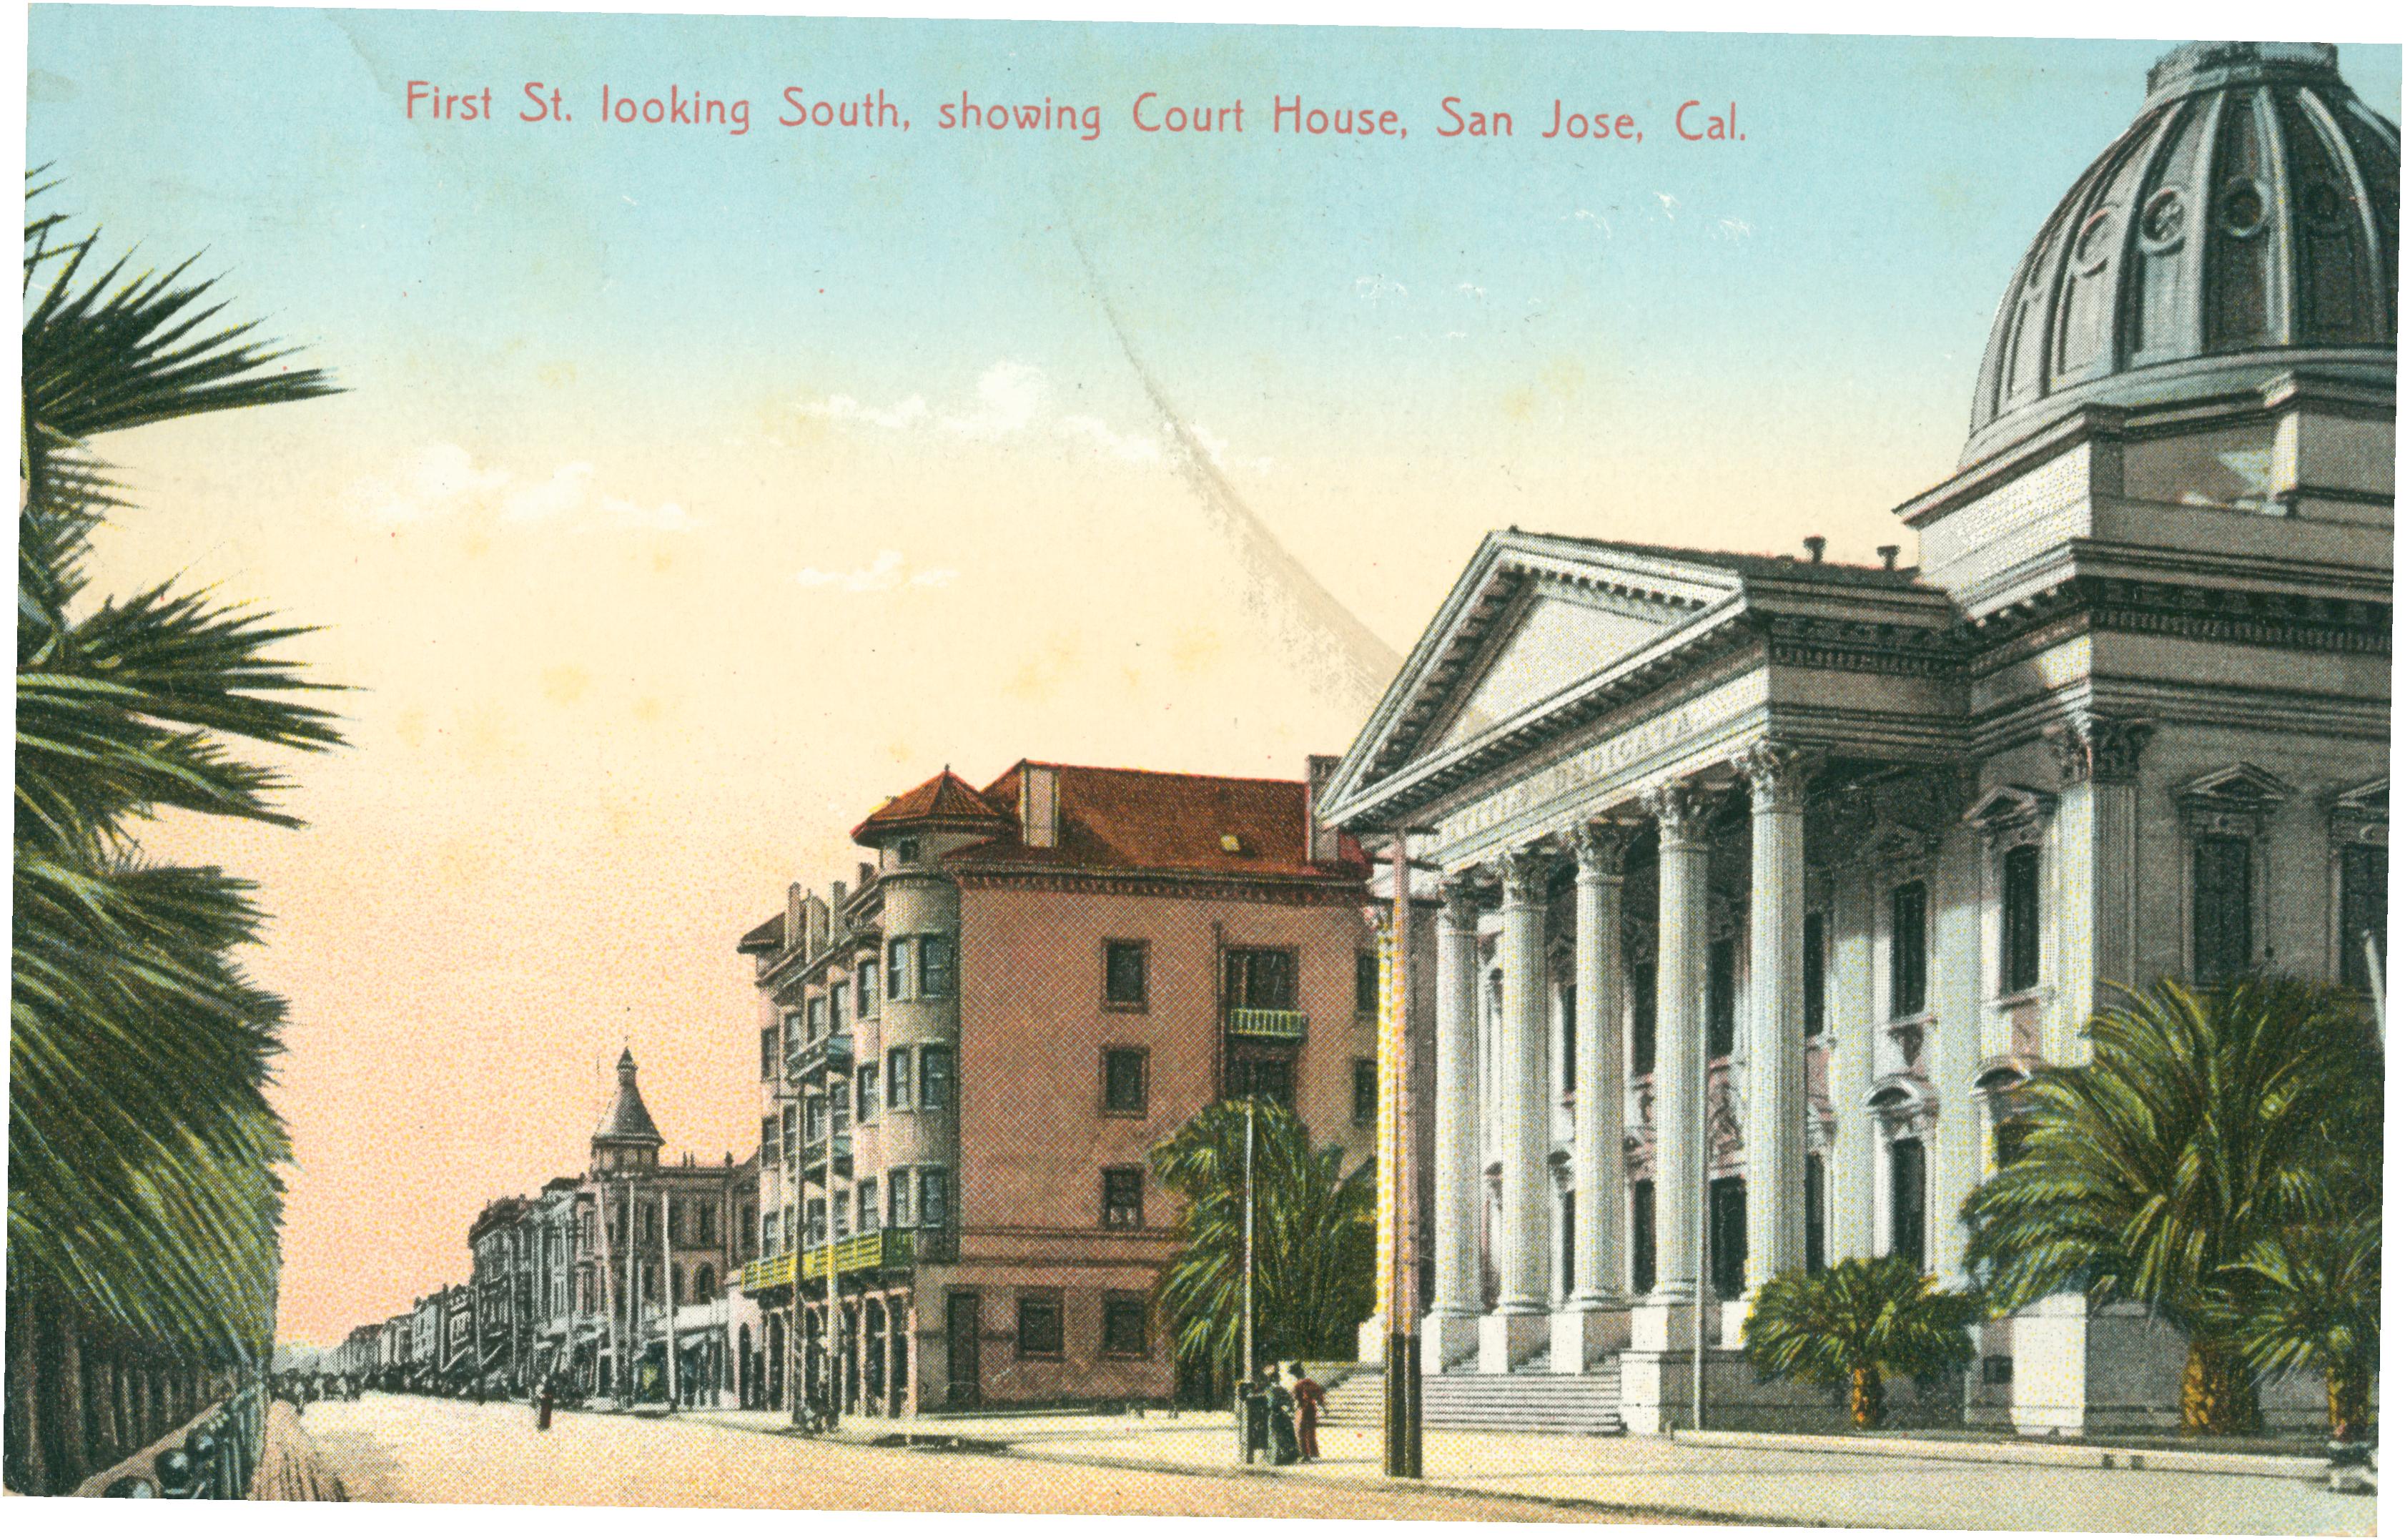 Exterior view of the Court House and First Street, San Jose California